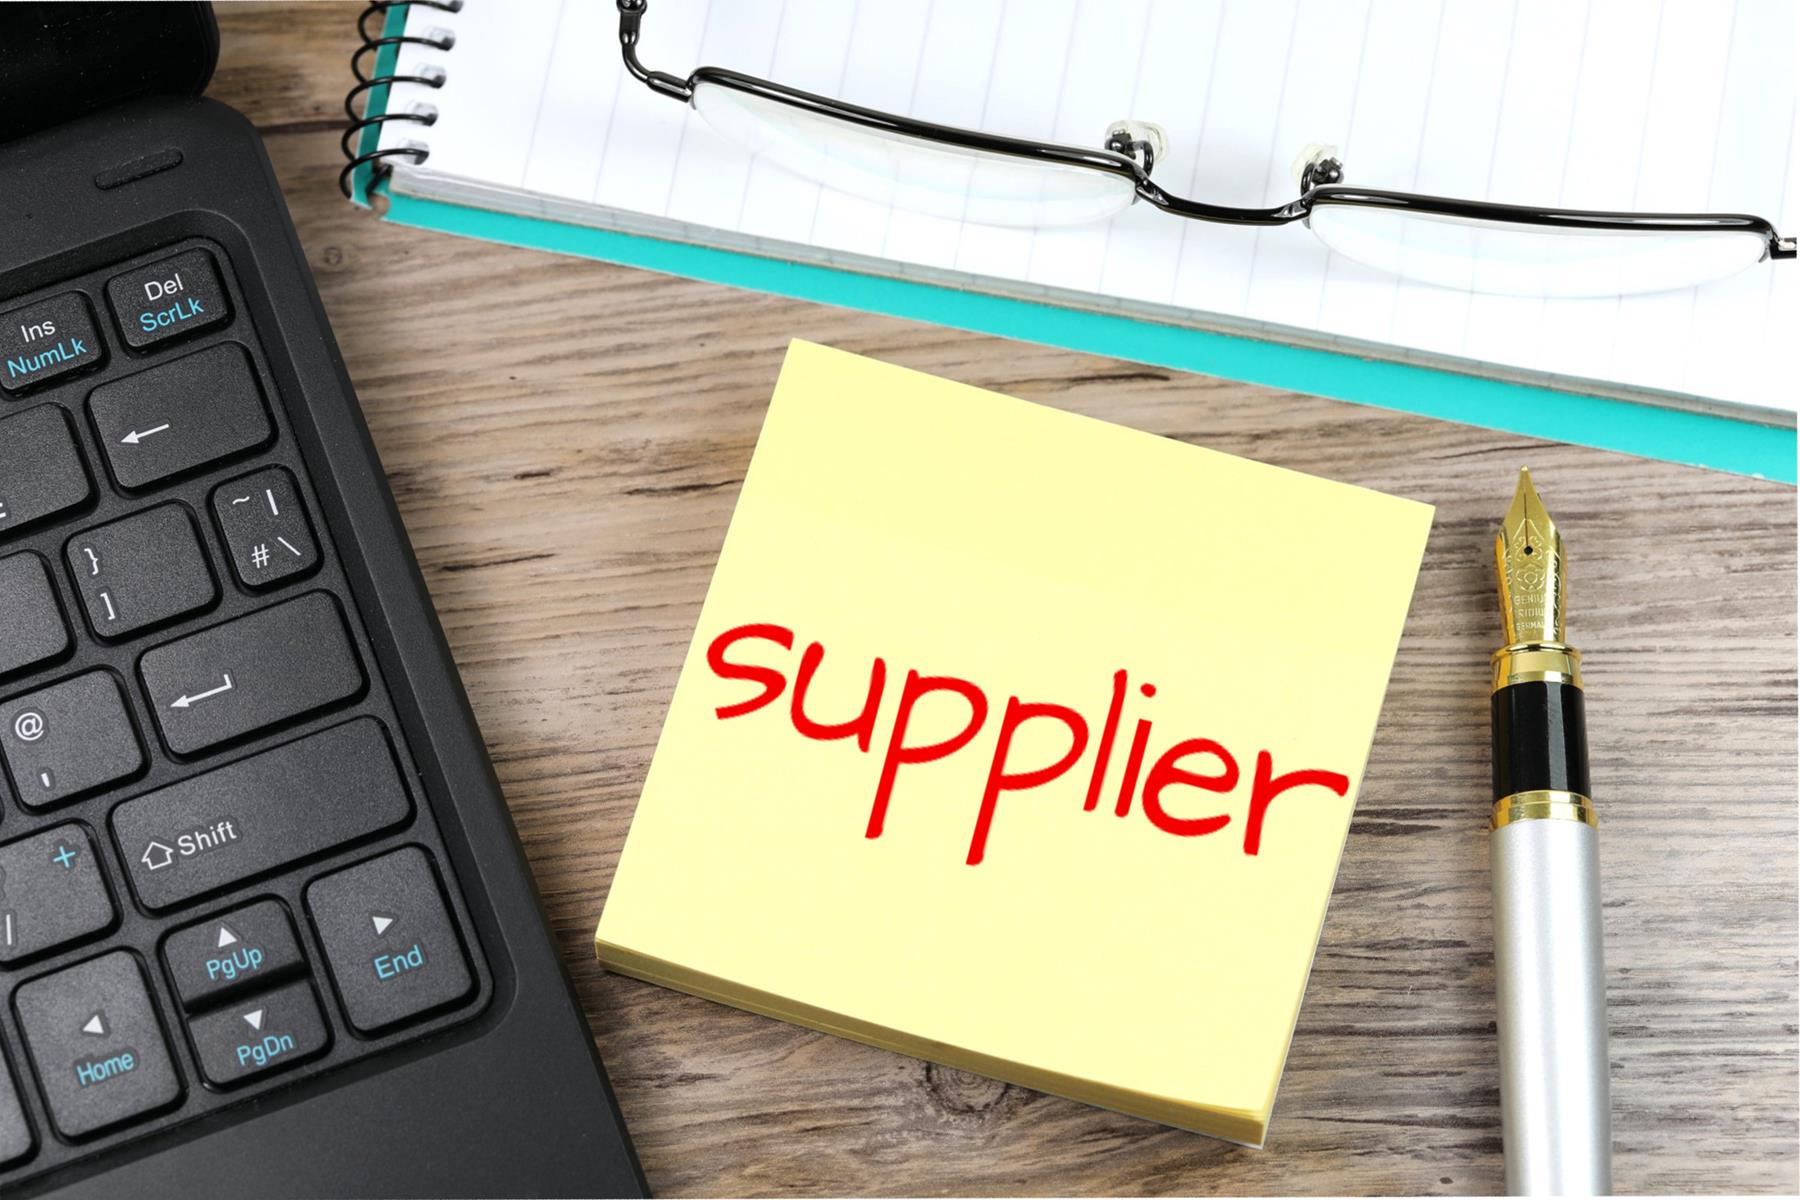 supplier-free-of-charge-creative-commons-post-it-note-image